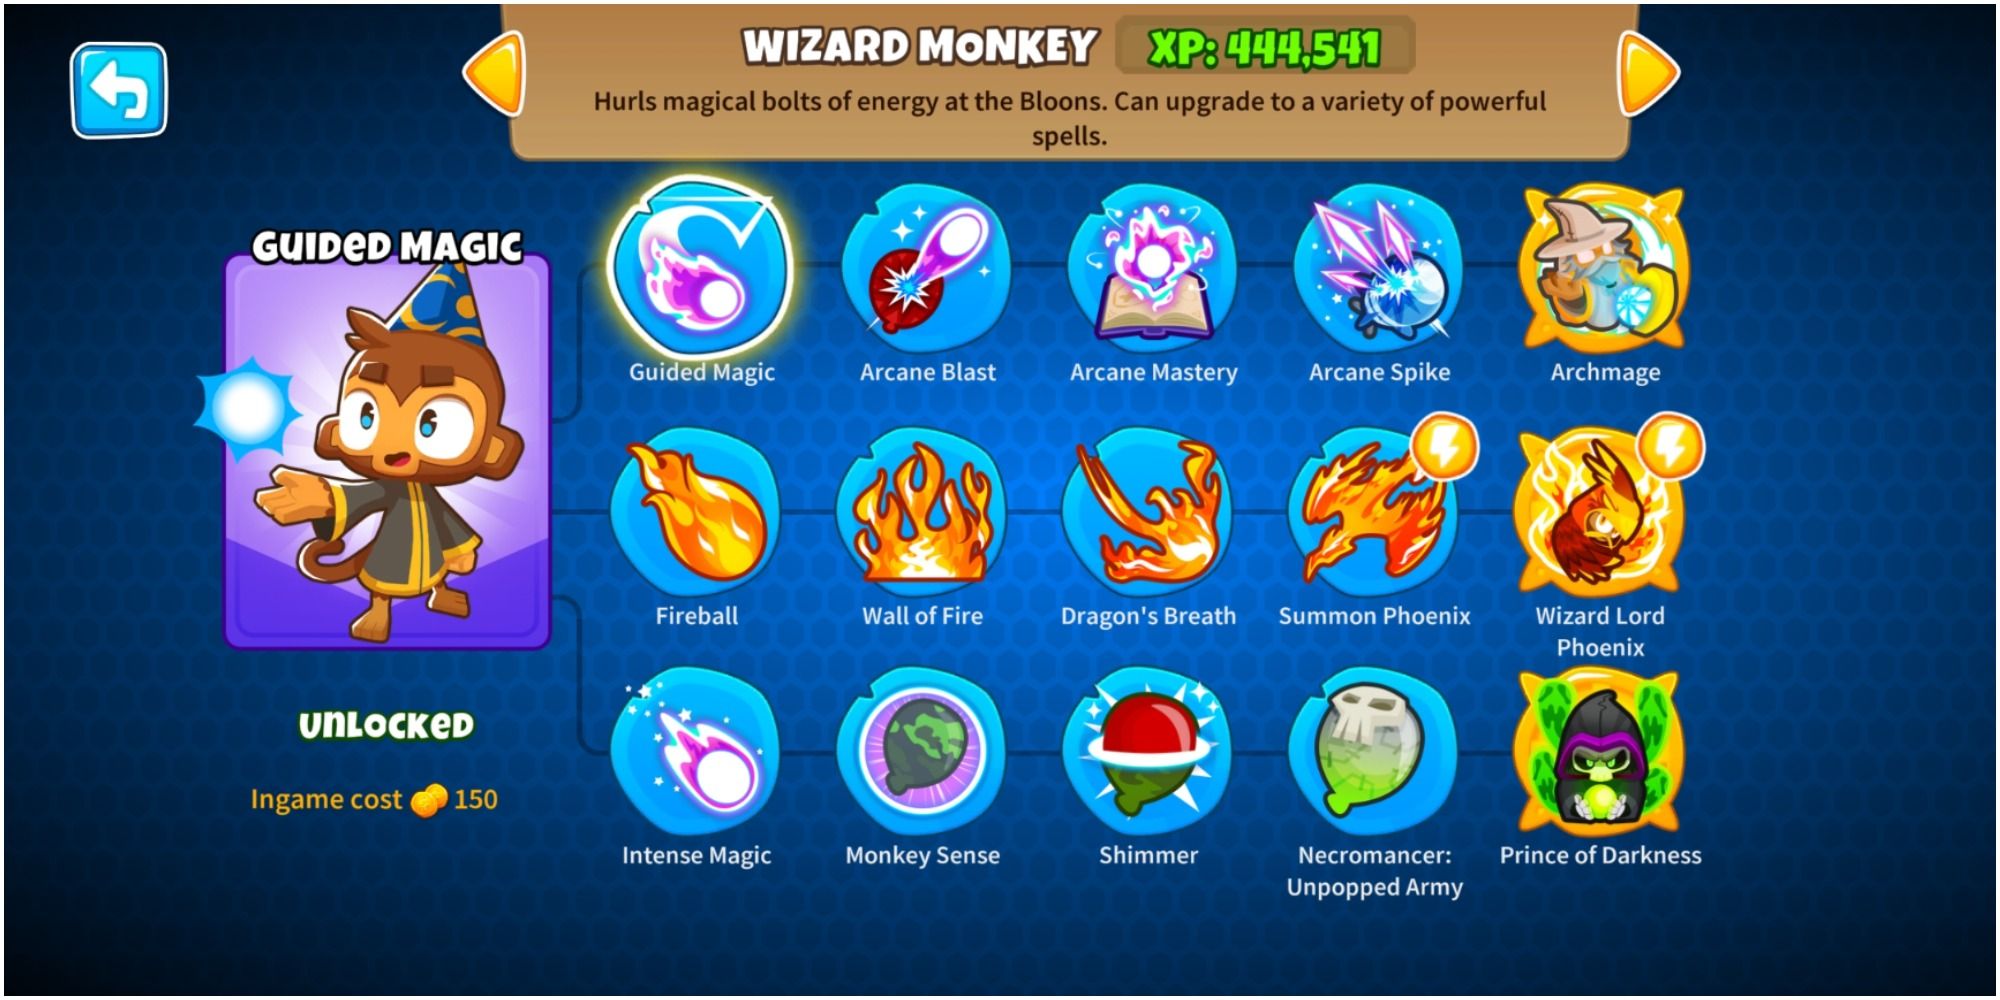 Bloons TD 6 Wizard Monkey Paths